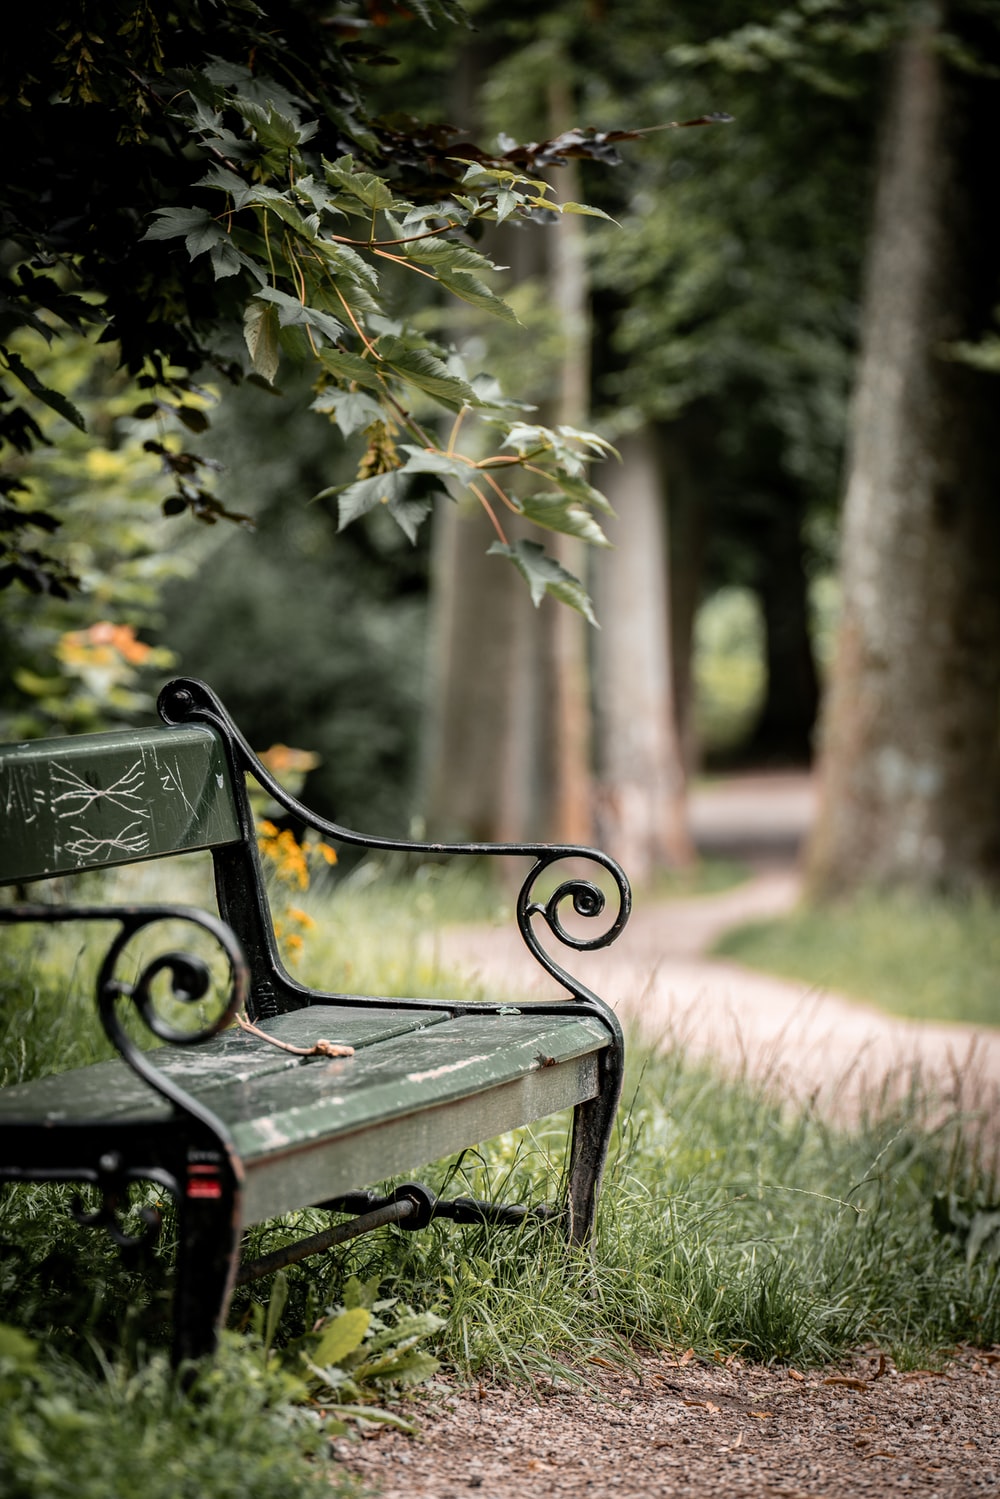 Park Bench Picture [HQ]. Download Free Image